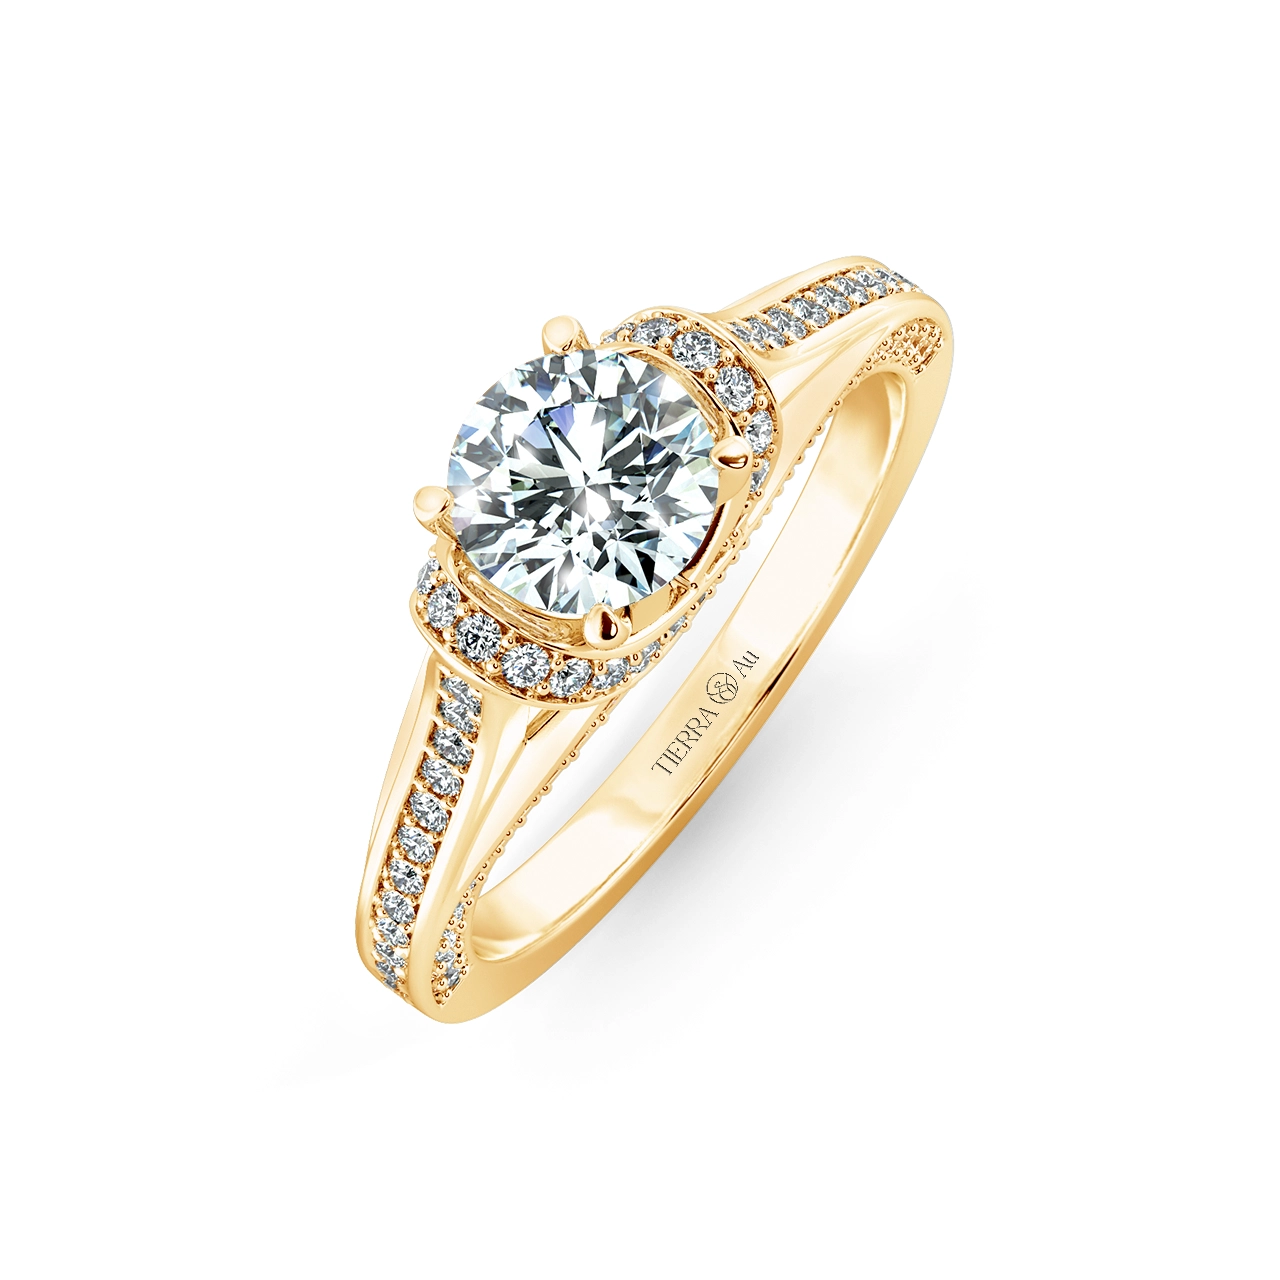 Trellis Engagement Ring with Stylized NCH1408 3